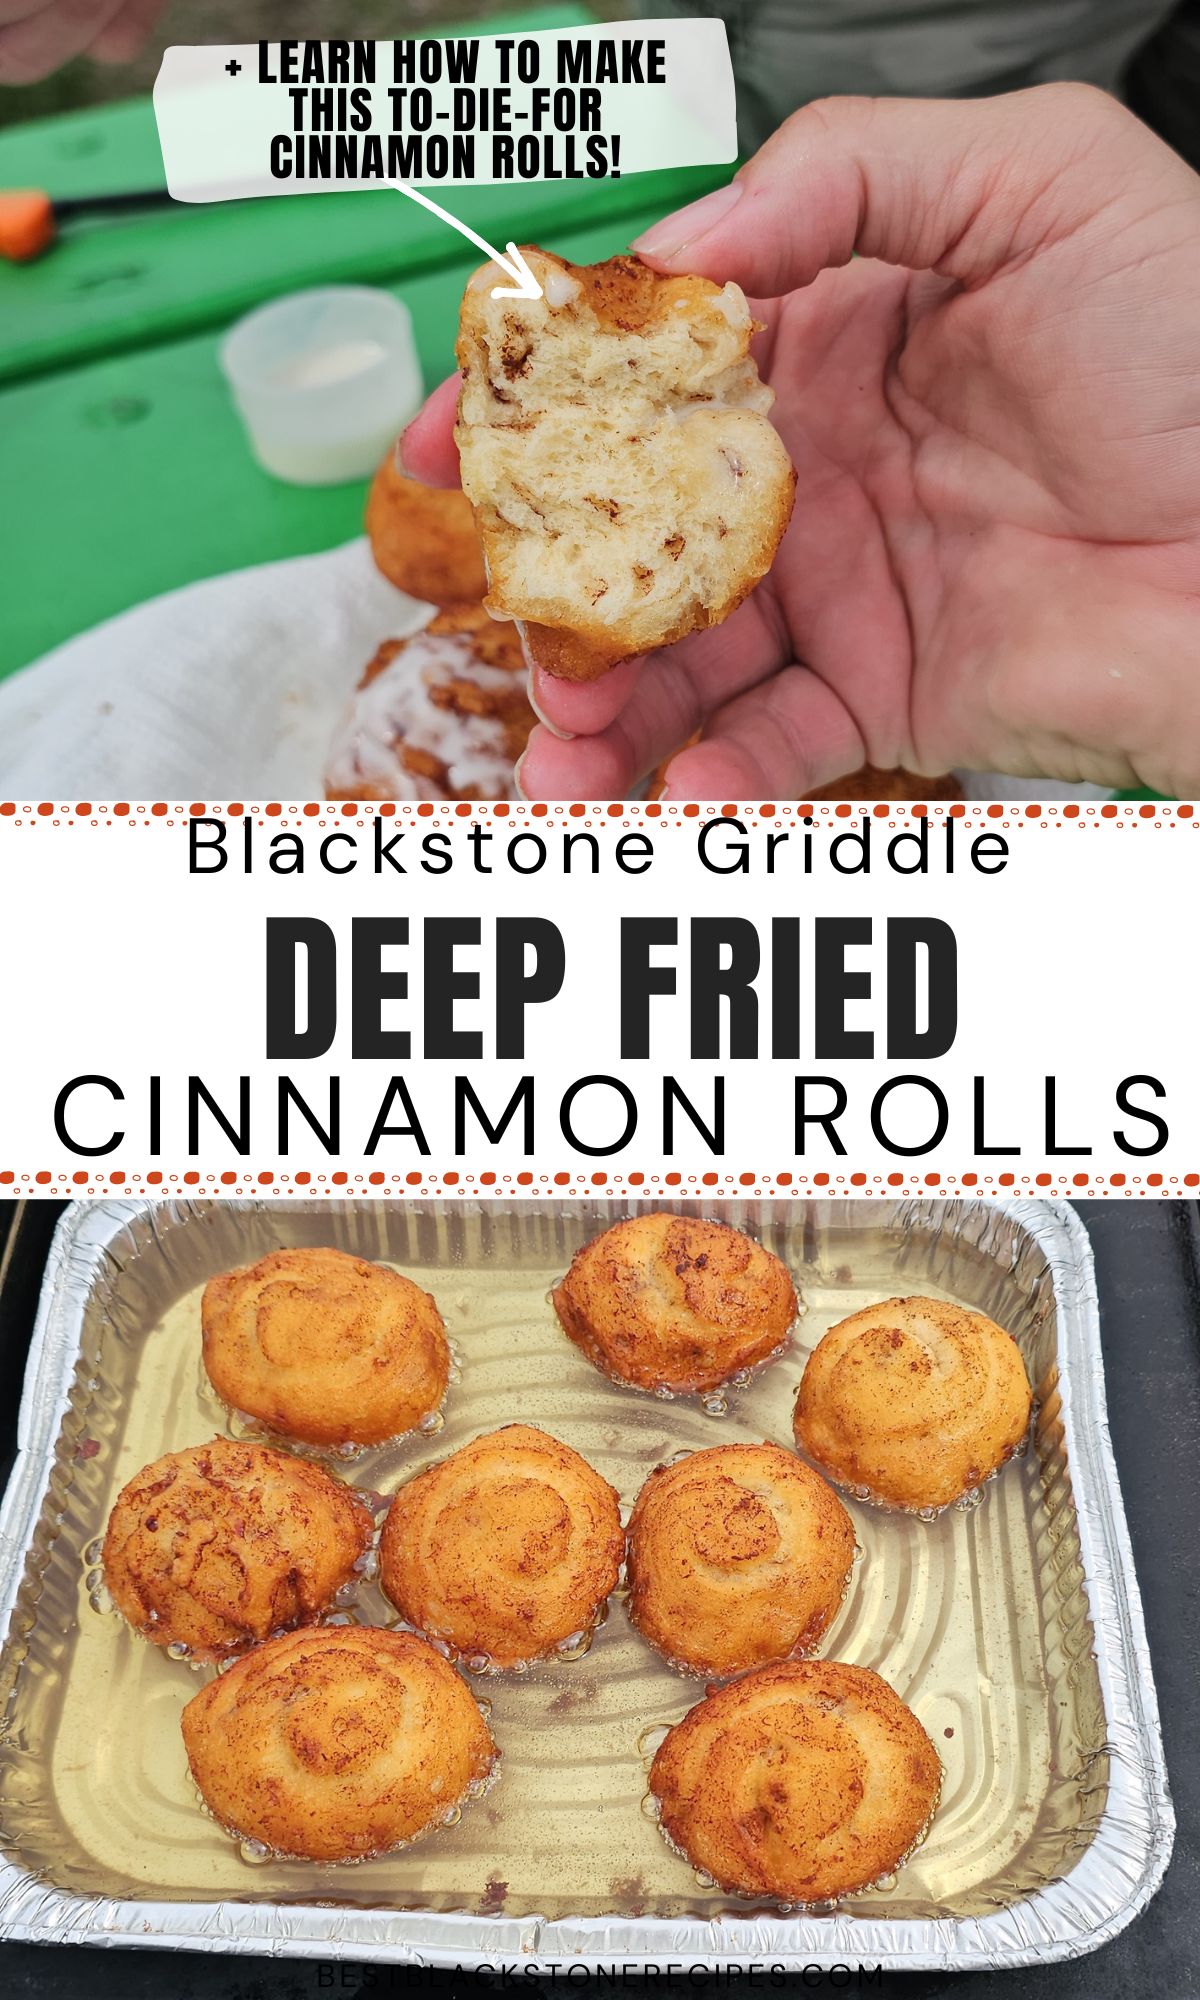 A hand holding a bitten deep-fried cinnamon roll with text overlay describing the recipe for "deep fried cinnamon rolls" on a blackstone griddle.